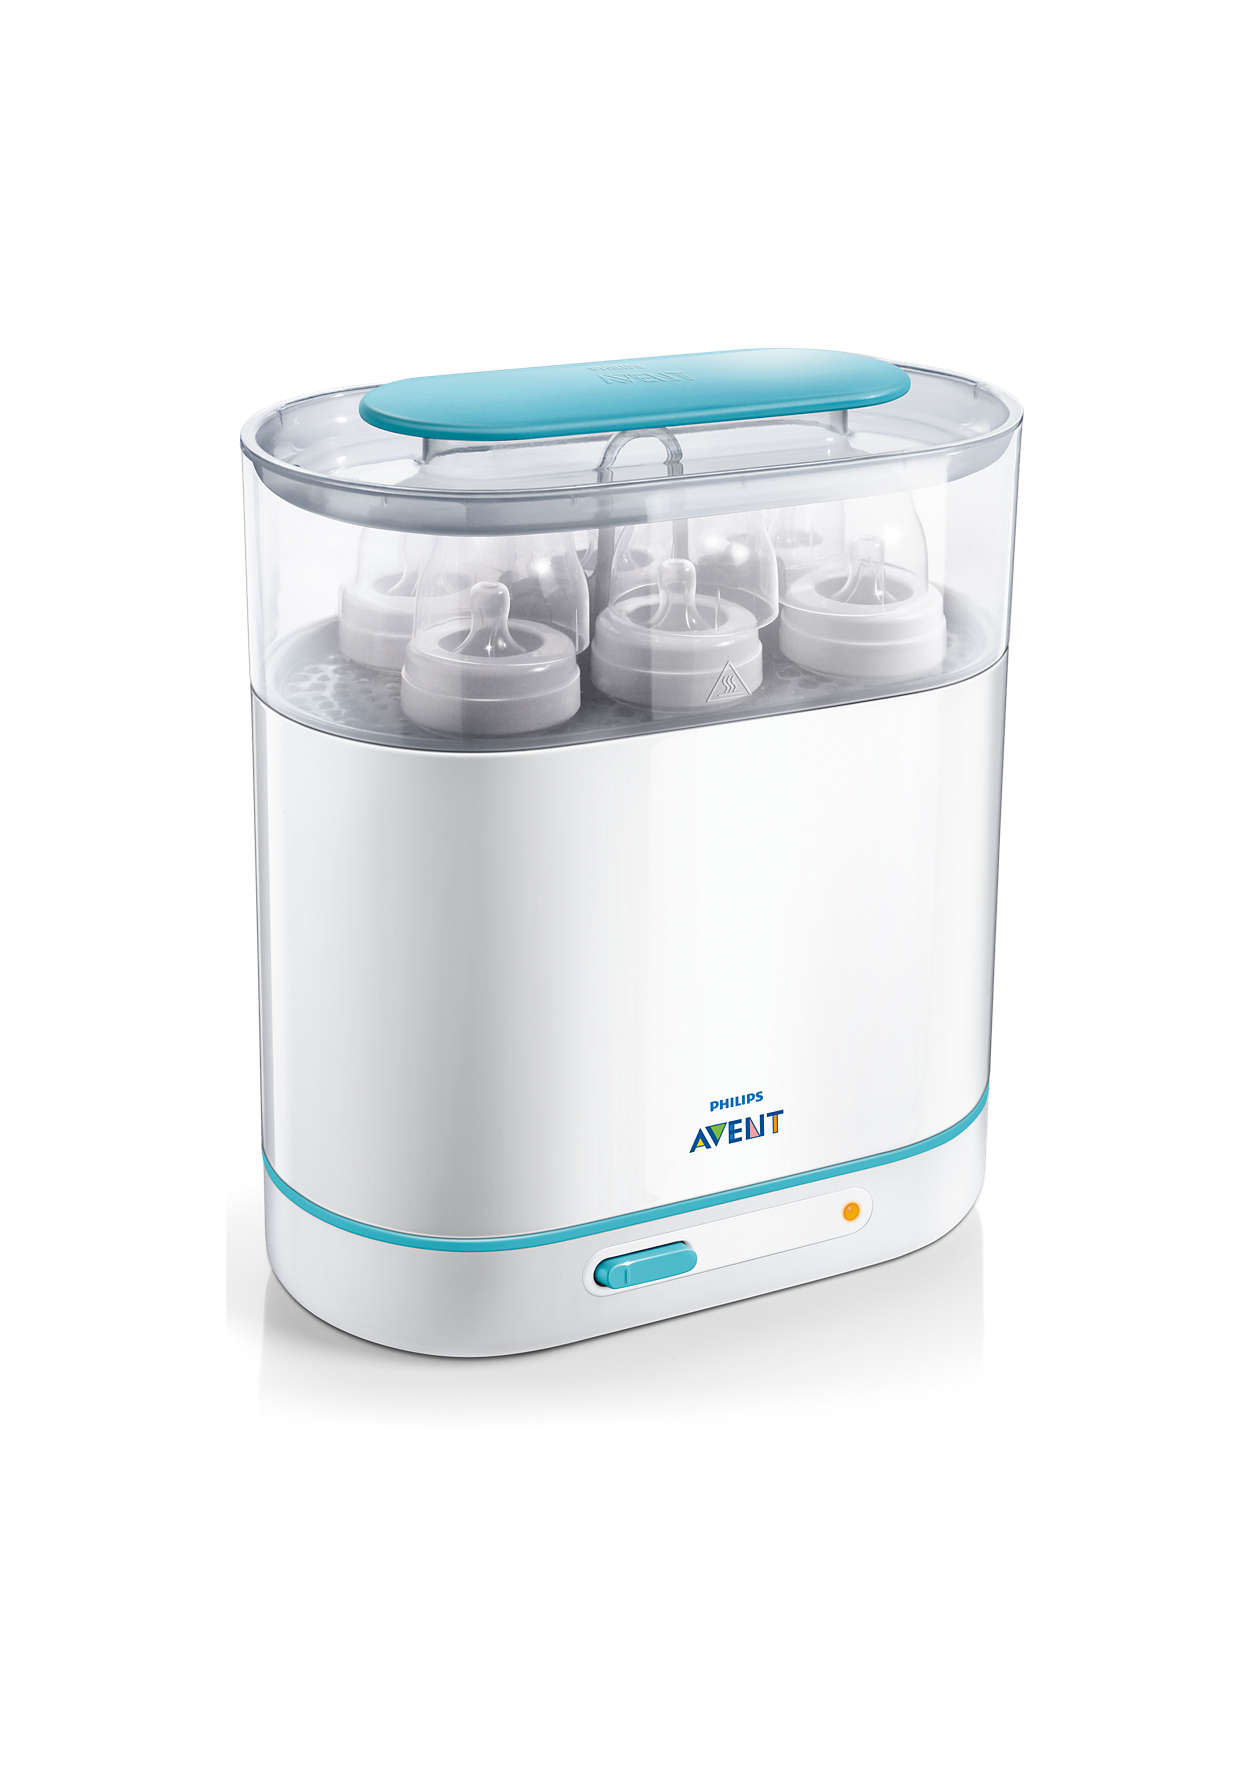 How To Clean Philips Avent Sterilizer  